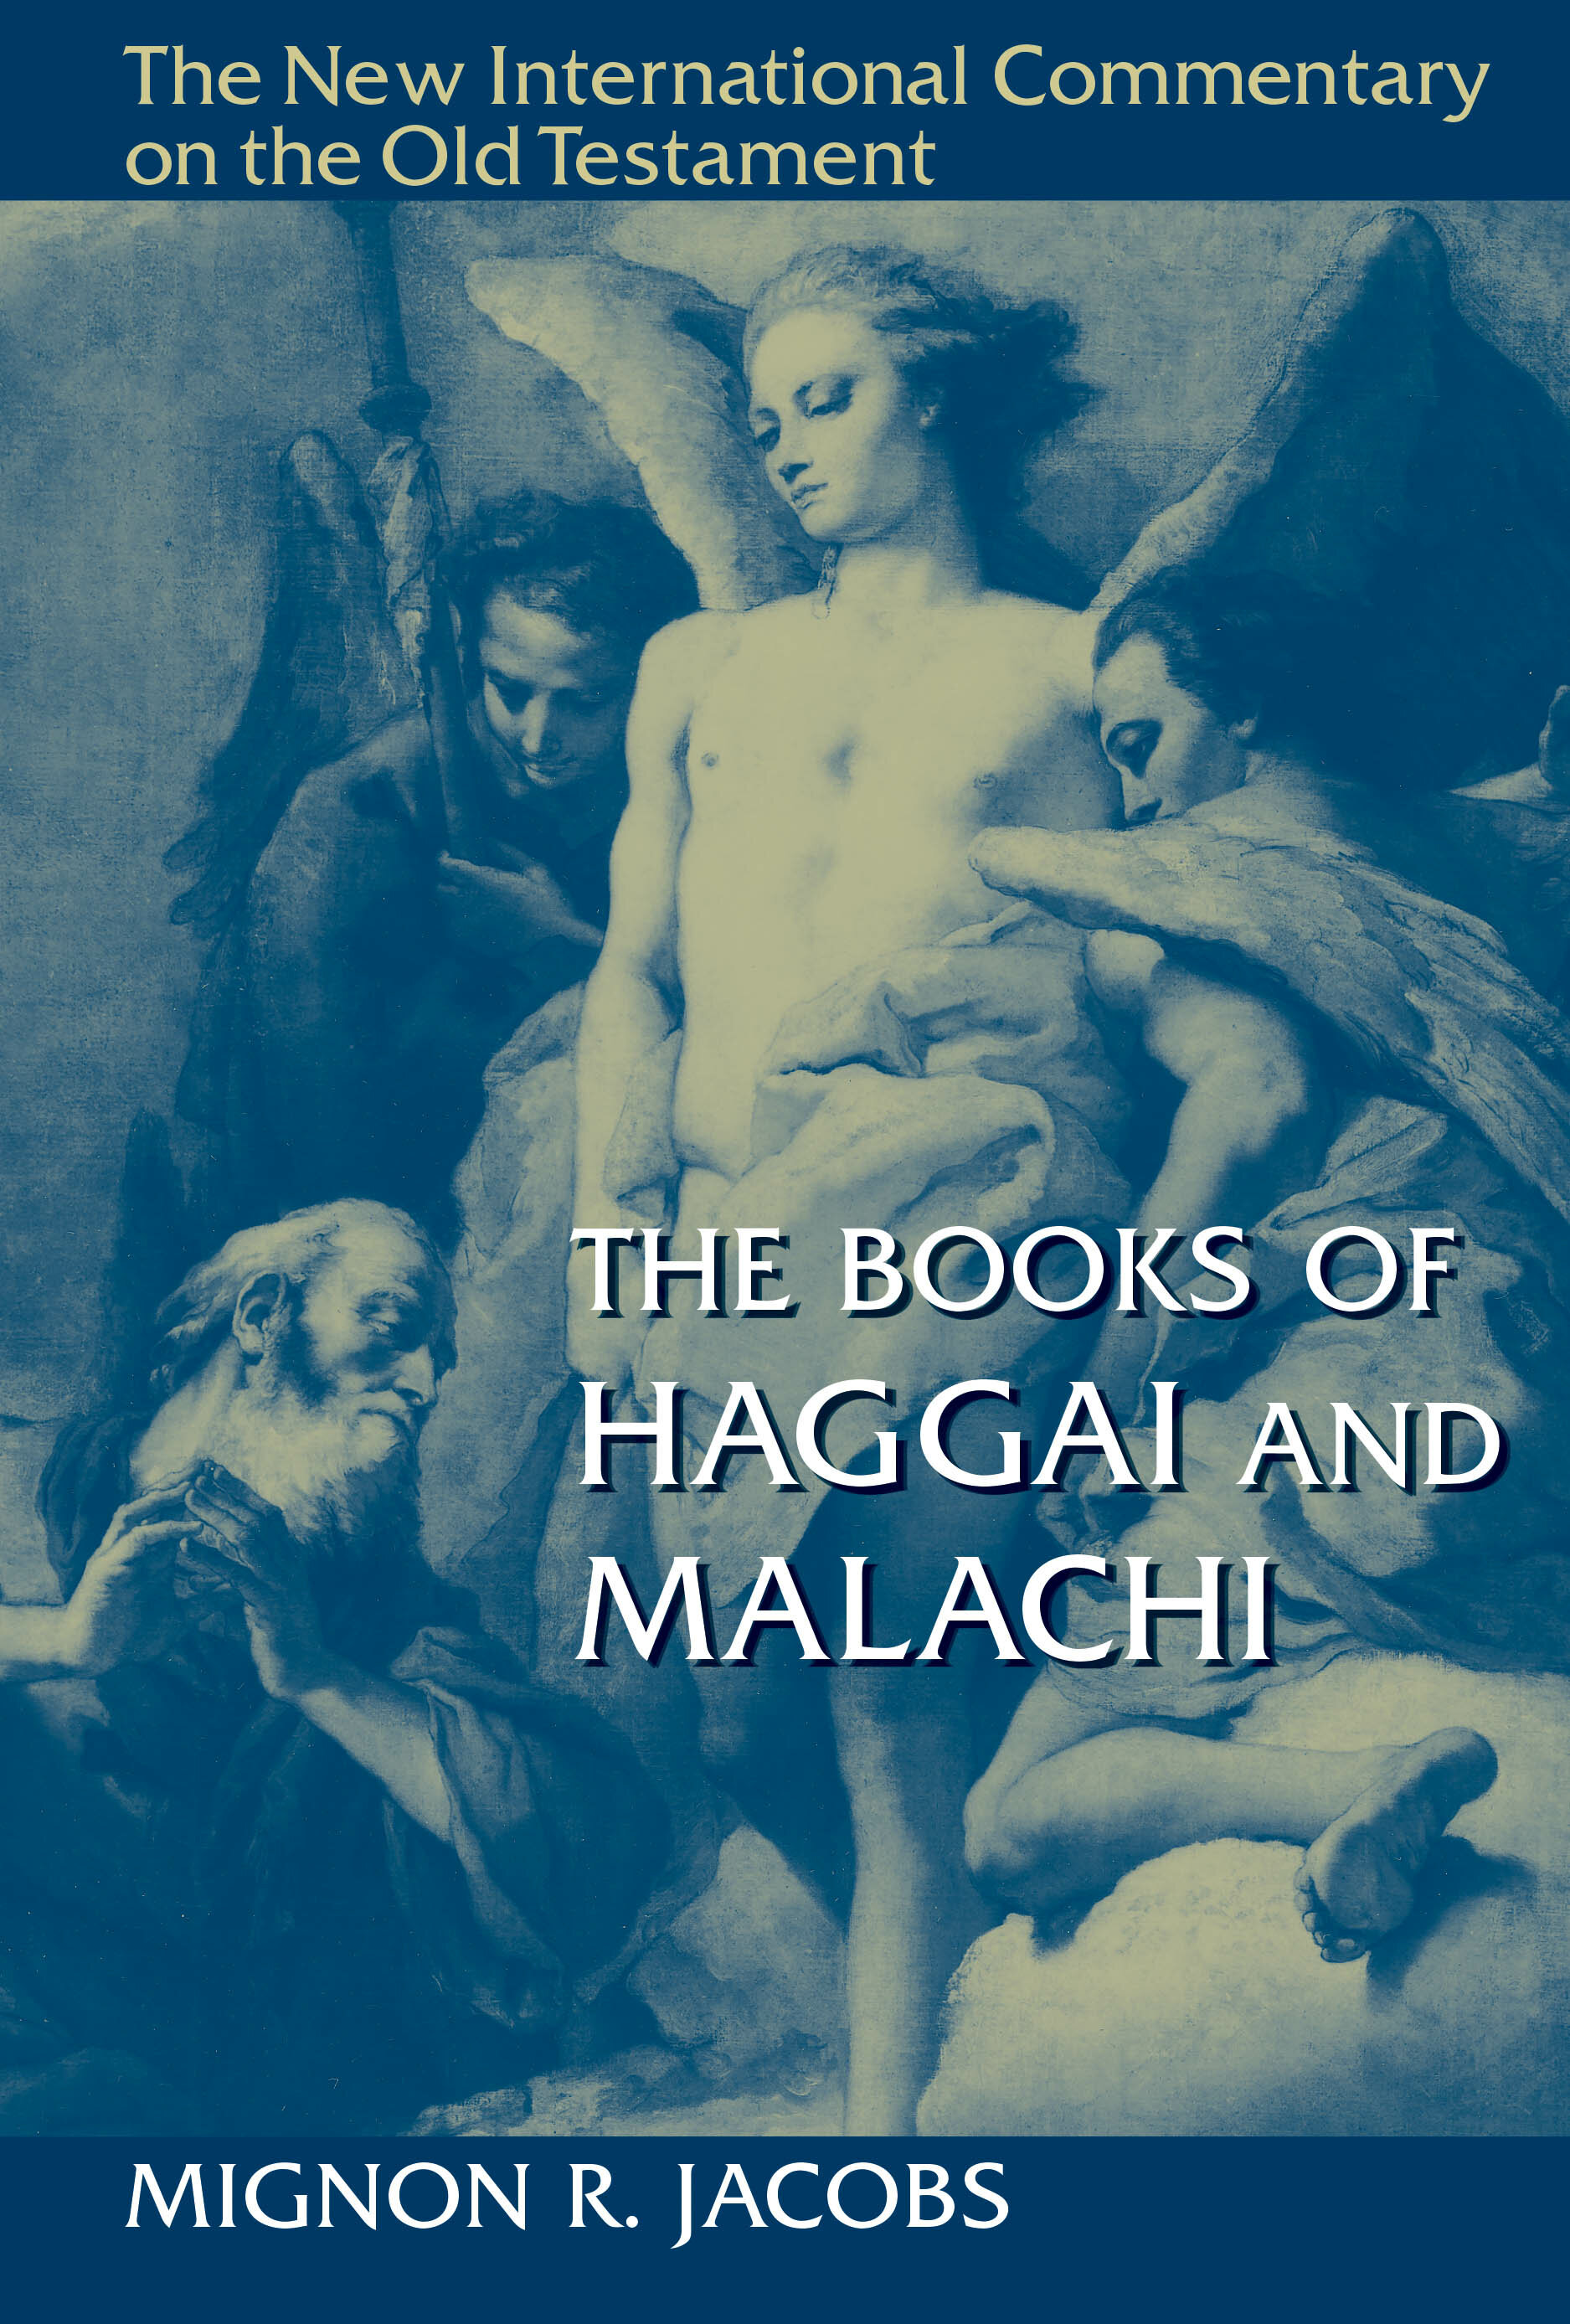 The Books of Haggai and Malachi (The New International Commentary on the Old Testament | NICOT)